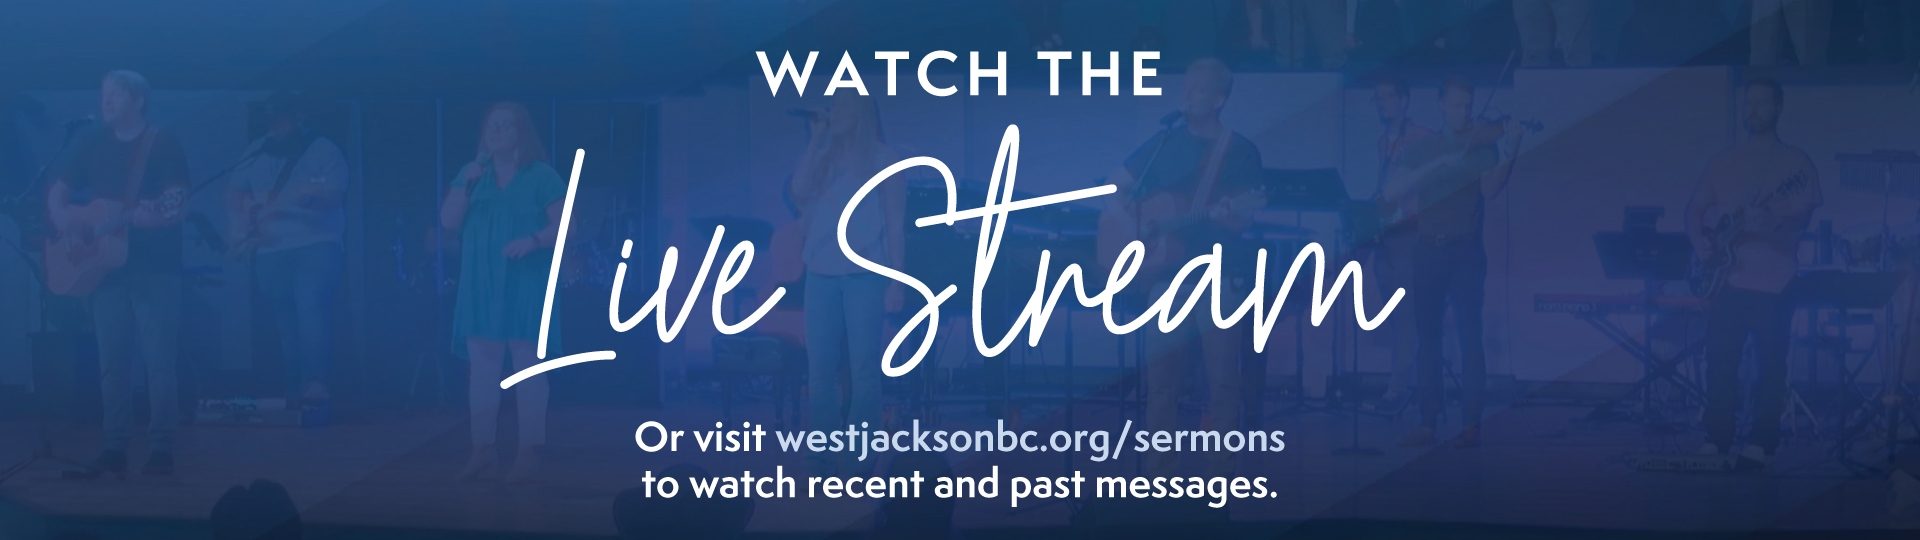 Watch the Live Stream Or visit westjacksonbc.org/sermons to watch recent and past messages.